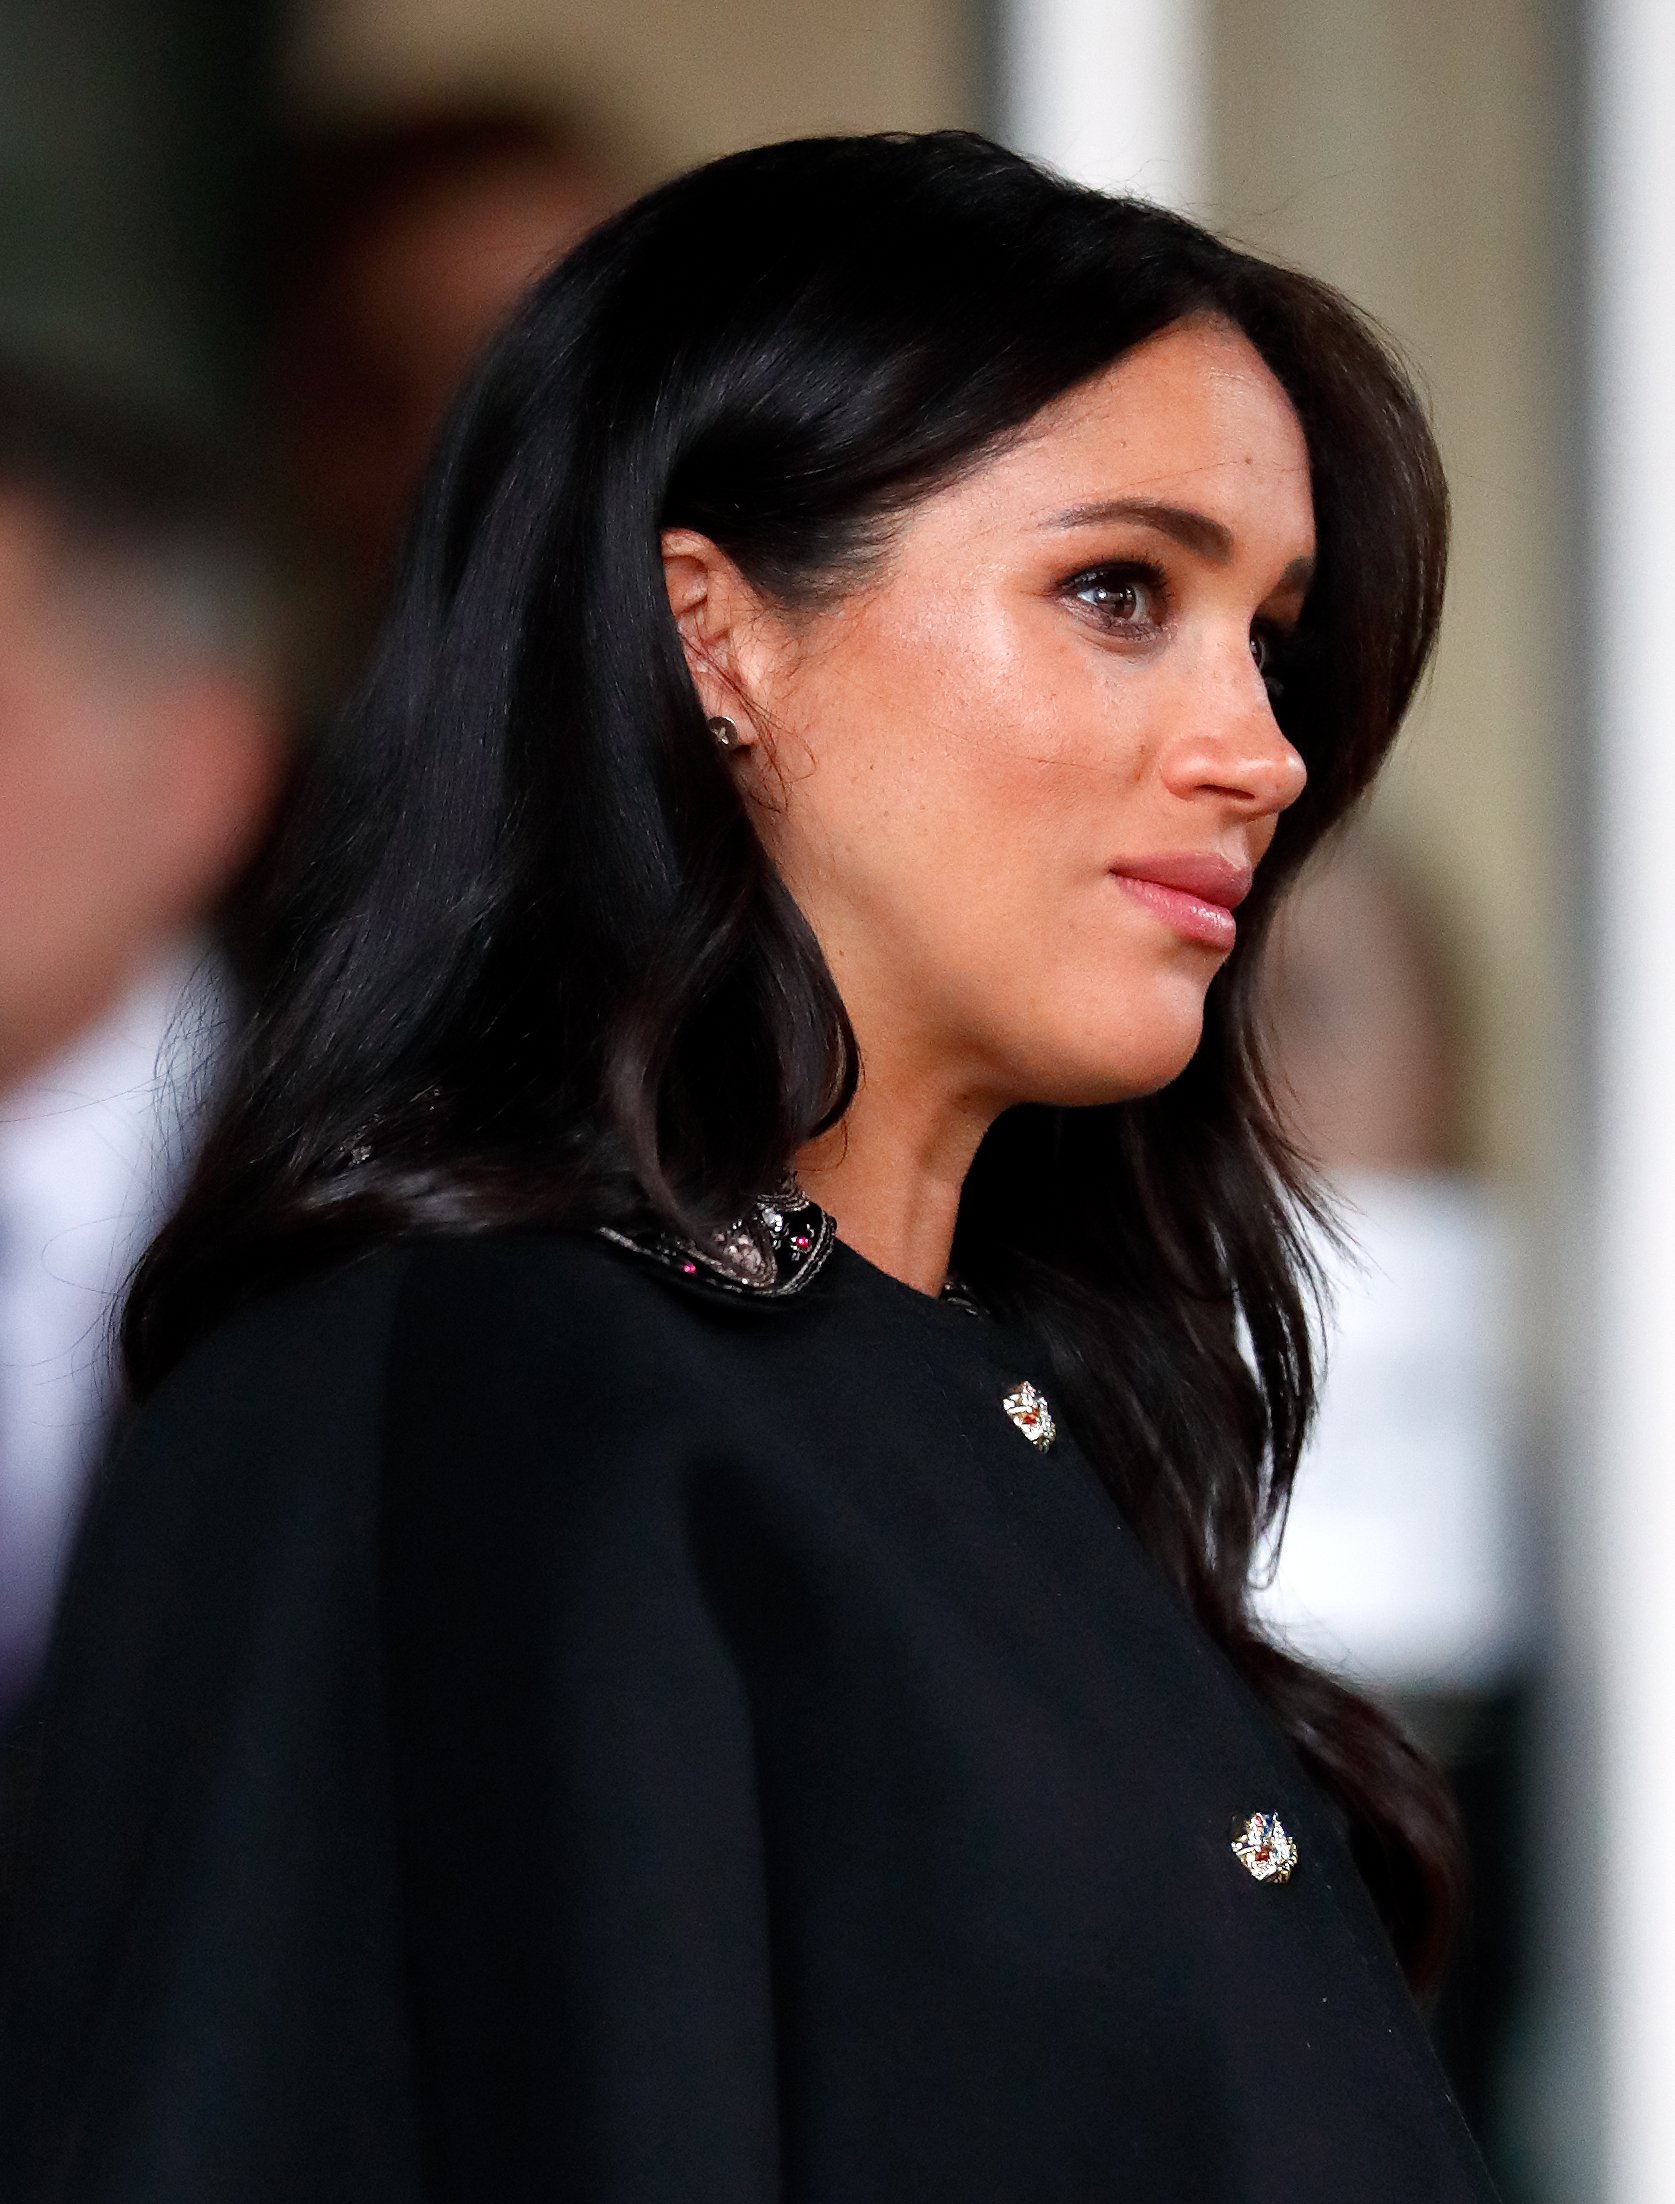 Meghan Markle, Duchess of Sussex visiting New Zealand House to sign a book of condolence on behalf of The Royal Family at a Mosque in Christchurch on March 19, 2019 in London, England. / Source: Getty Images